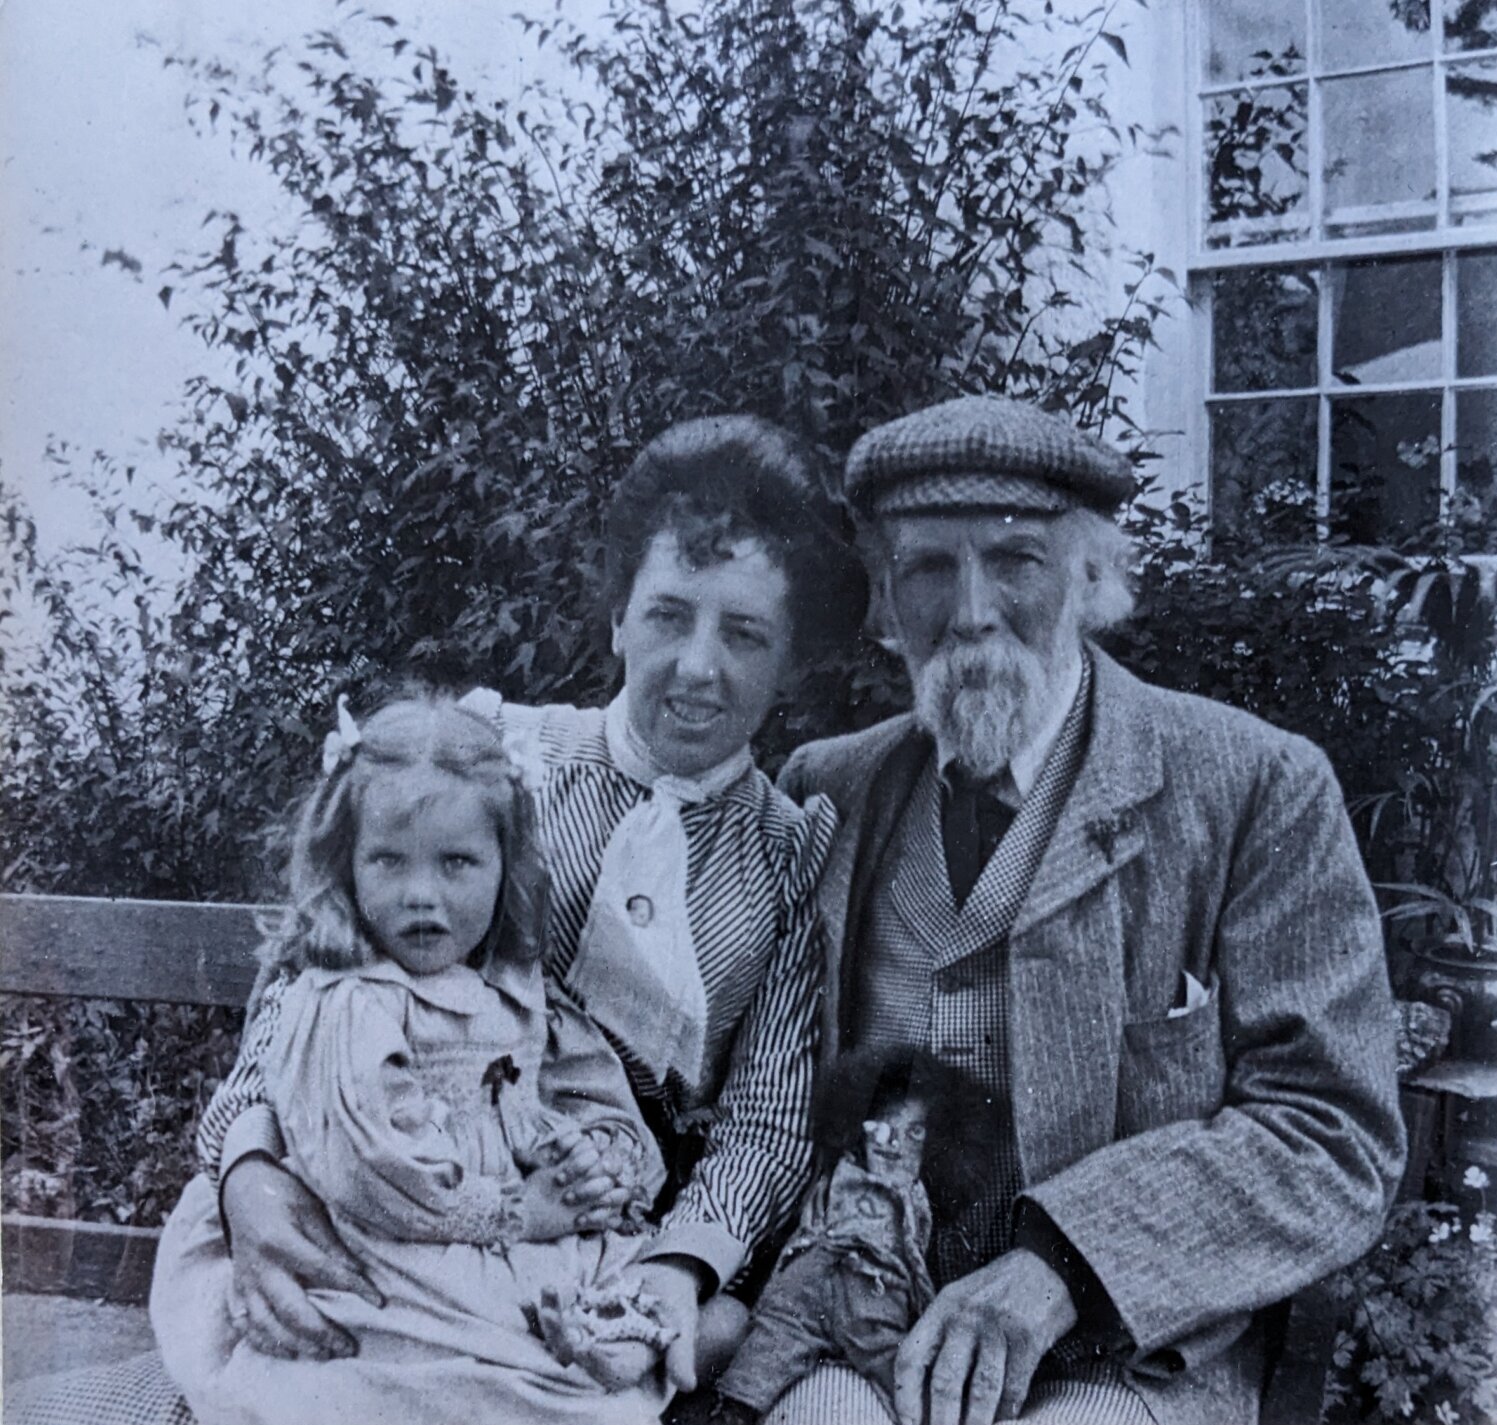 Thomas Heatherley sitting next to the daughter he had with his estranged wife Kate Heatherley and their granddaughter.